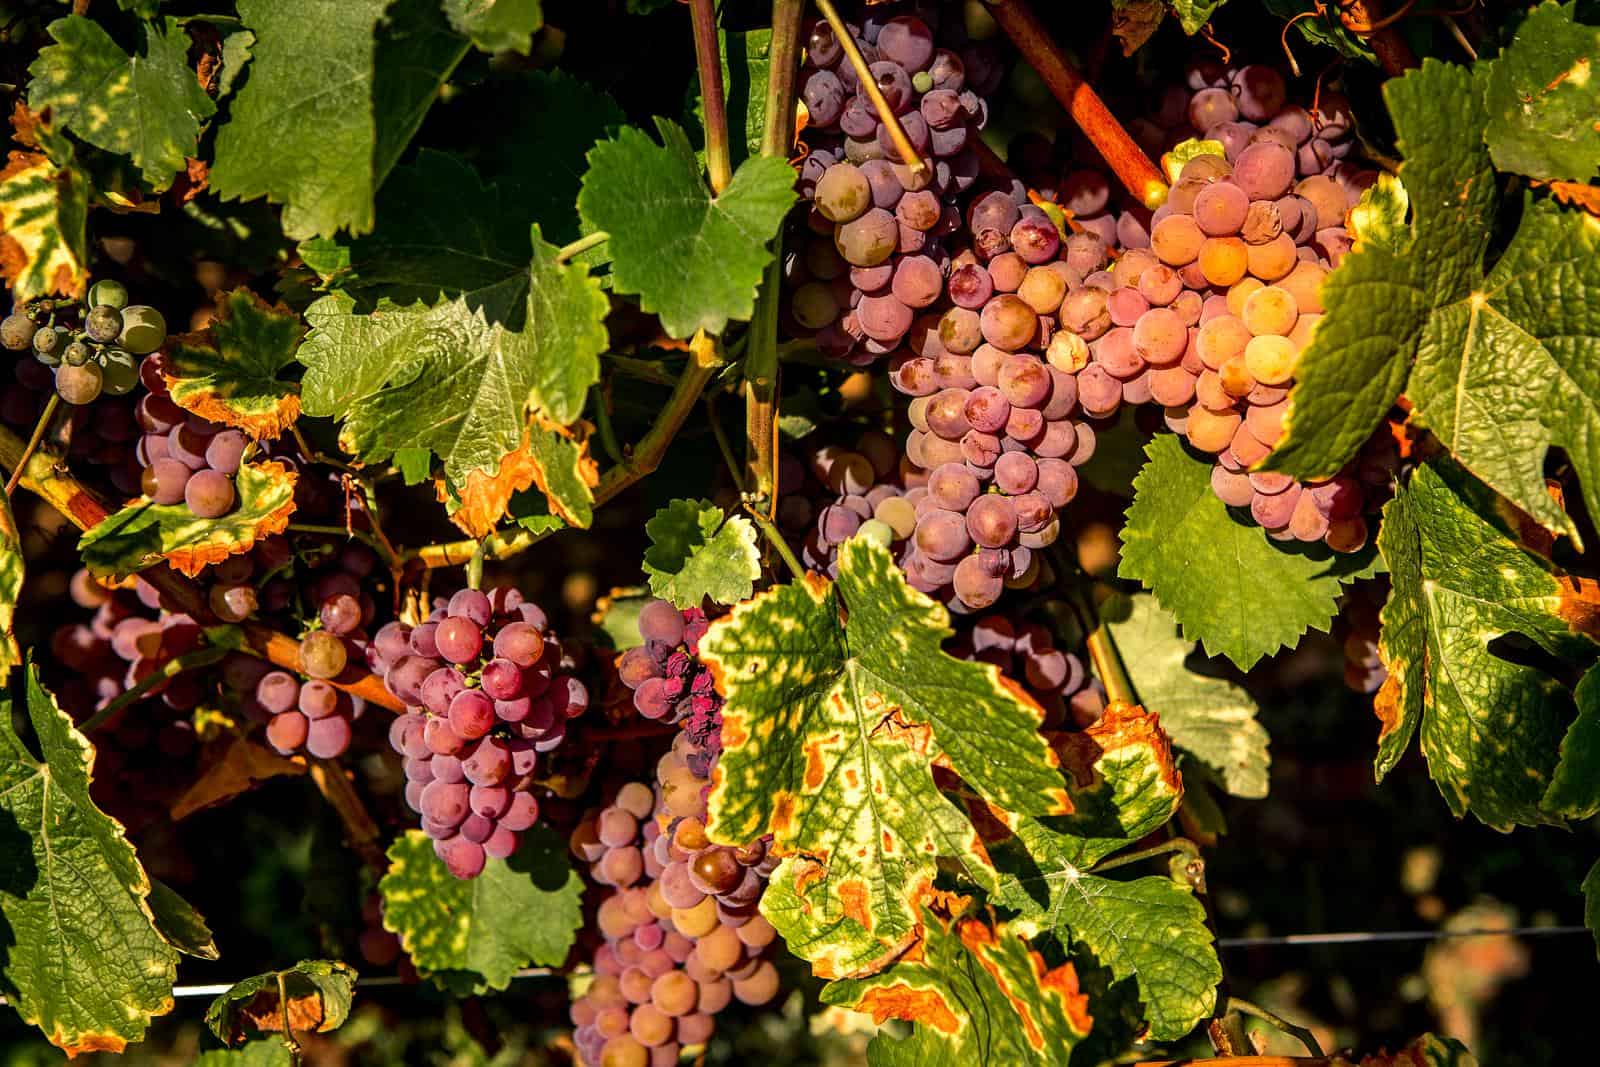 A cluster of ripe, light-purple grapes elegantly hang from the vine showcasing its plump, round shape, in anticipation of being harvested.